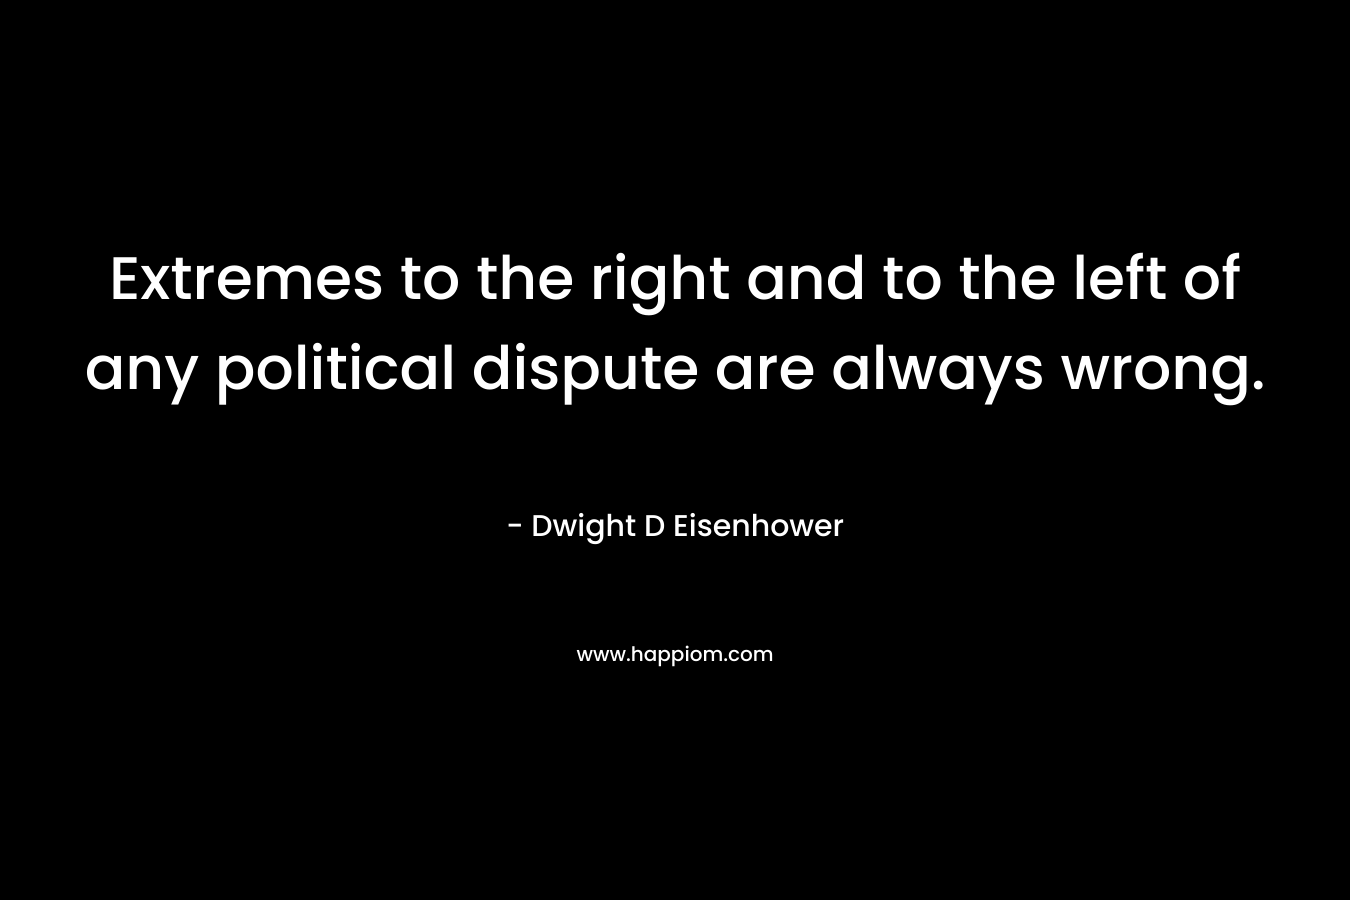 Extremes to the right and to the left of any political dispute are always wrong.